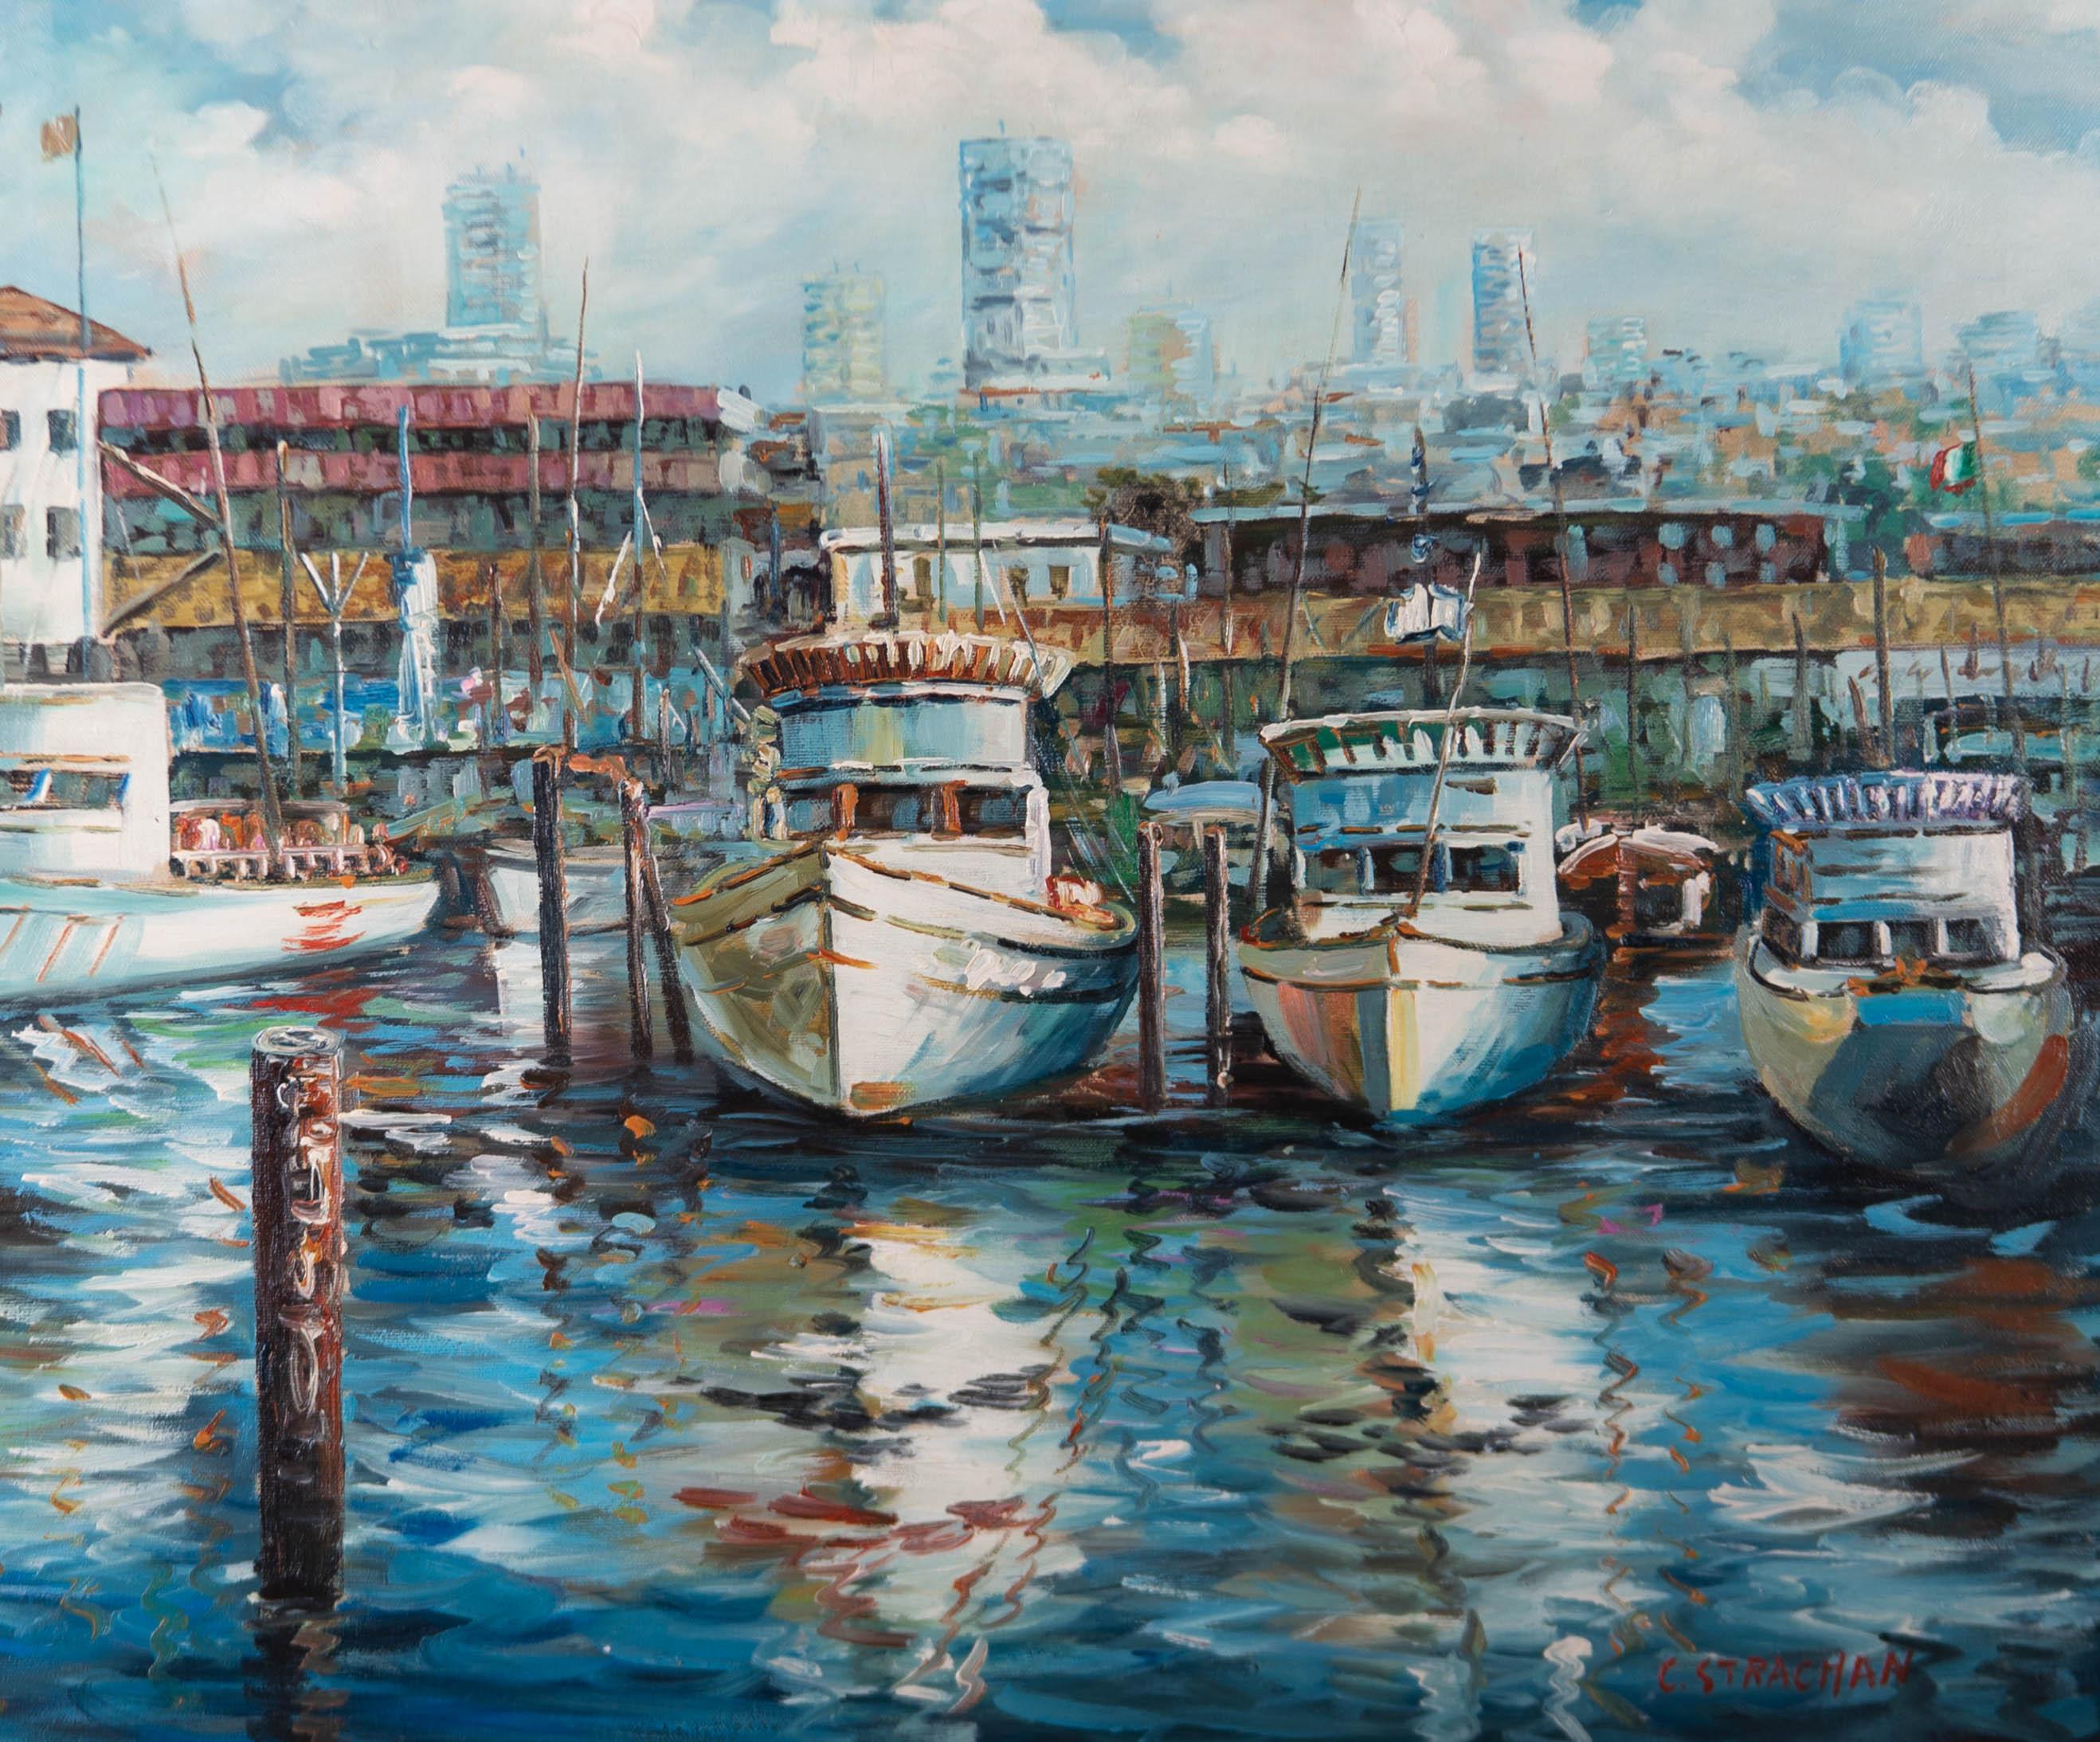 A vibrant oil painting, depicting boats lined up in a harbour. Signed to the lower right-hand corner. Well-presented in an off-white frame, as shown. On canvas on stretchers.
